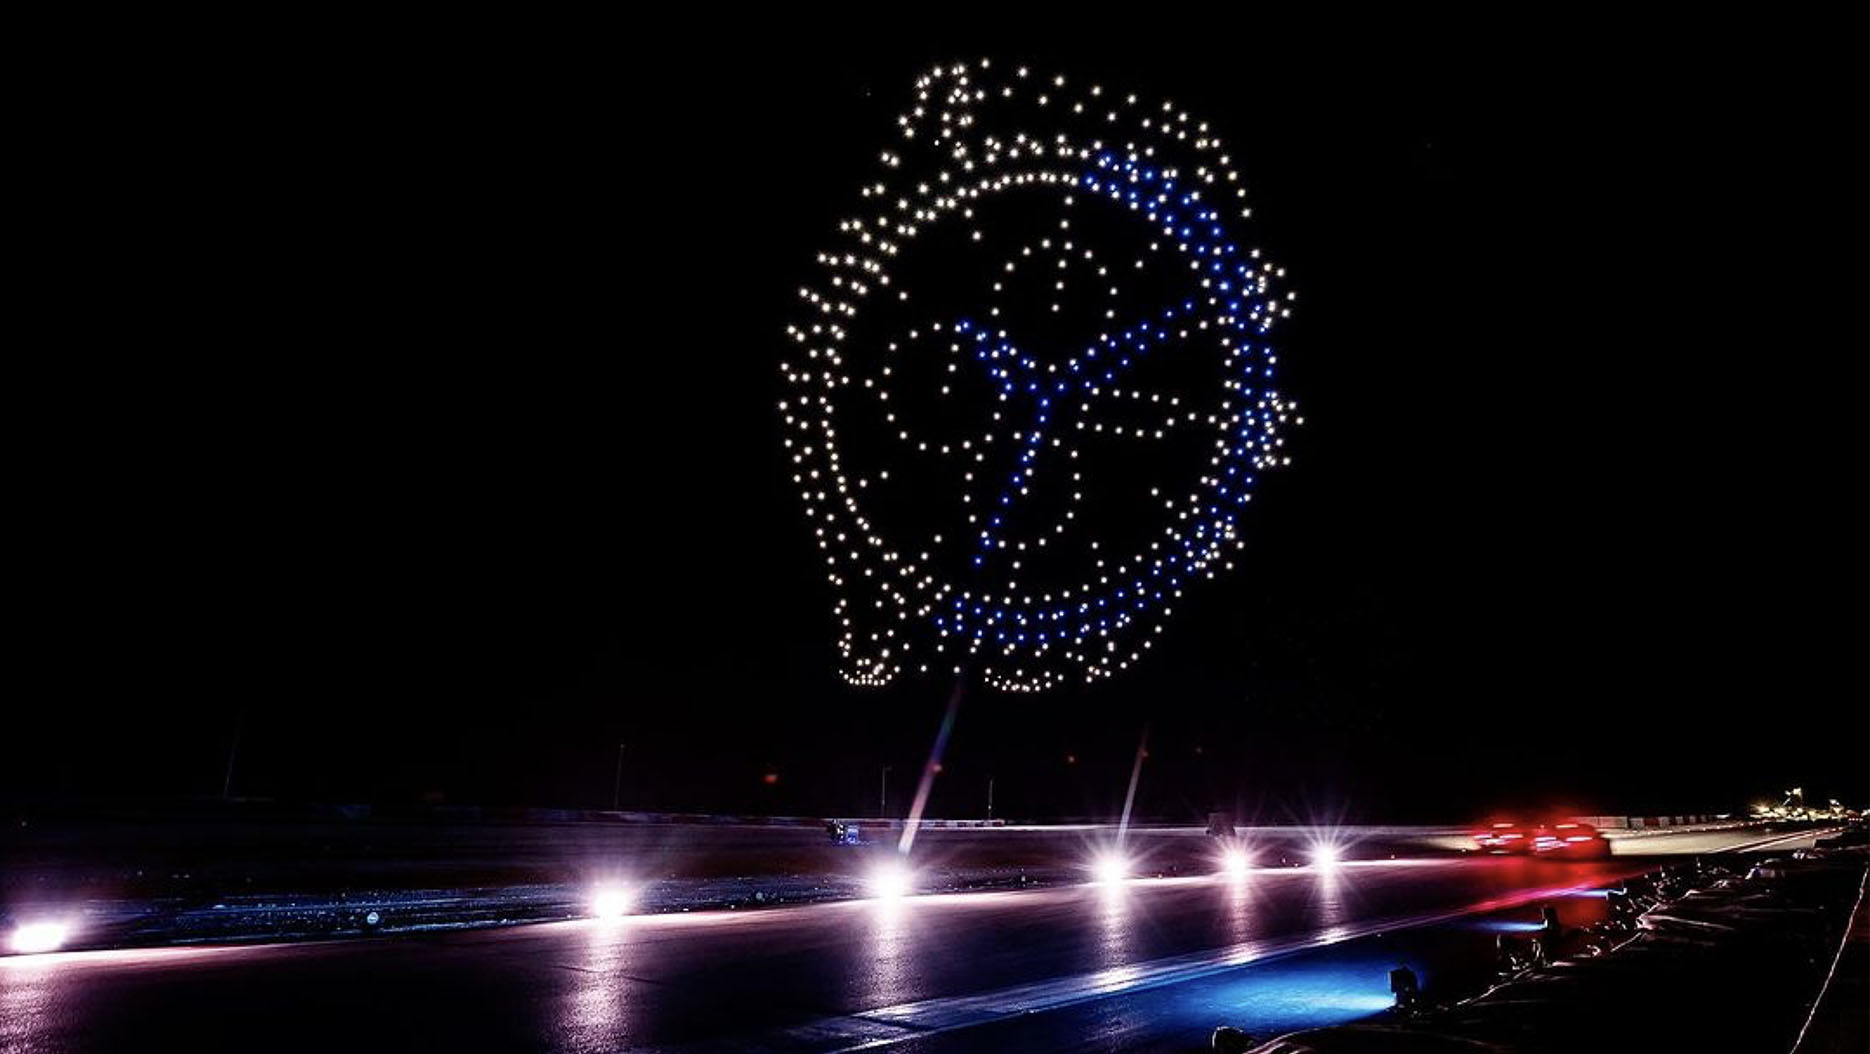 A brightly-lit watch face in the sky composed by drones during a light show.